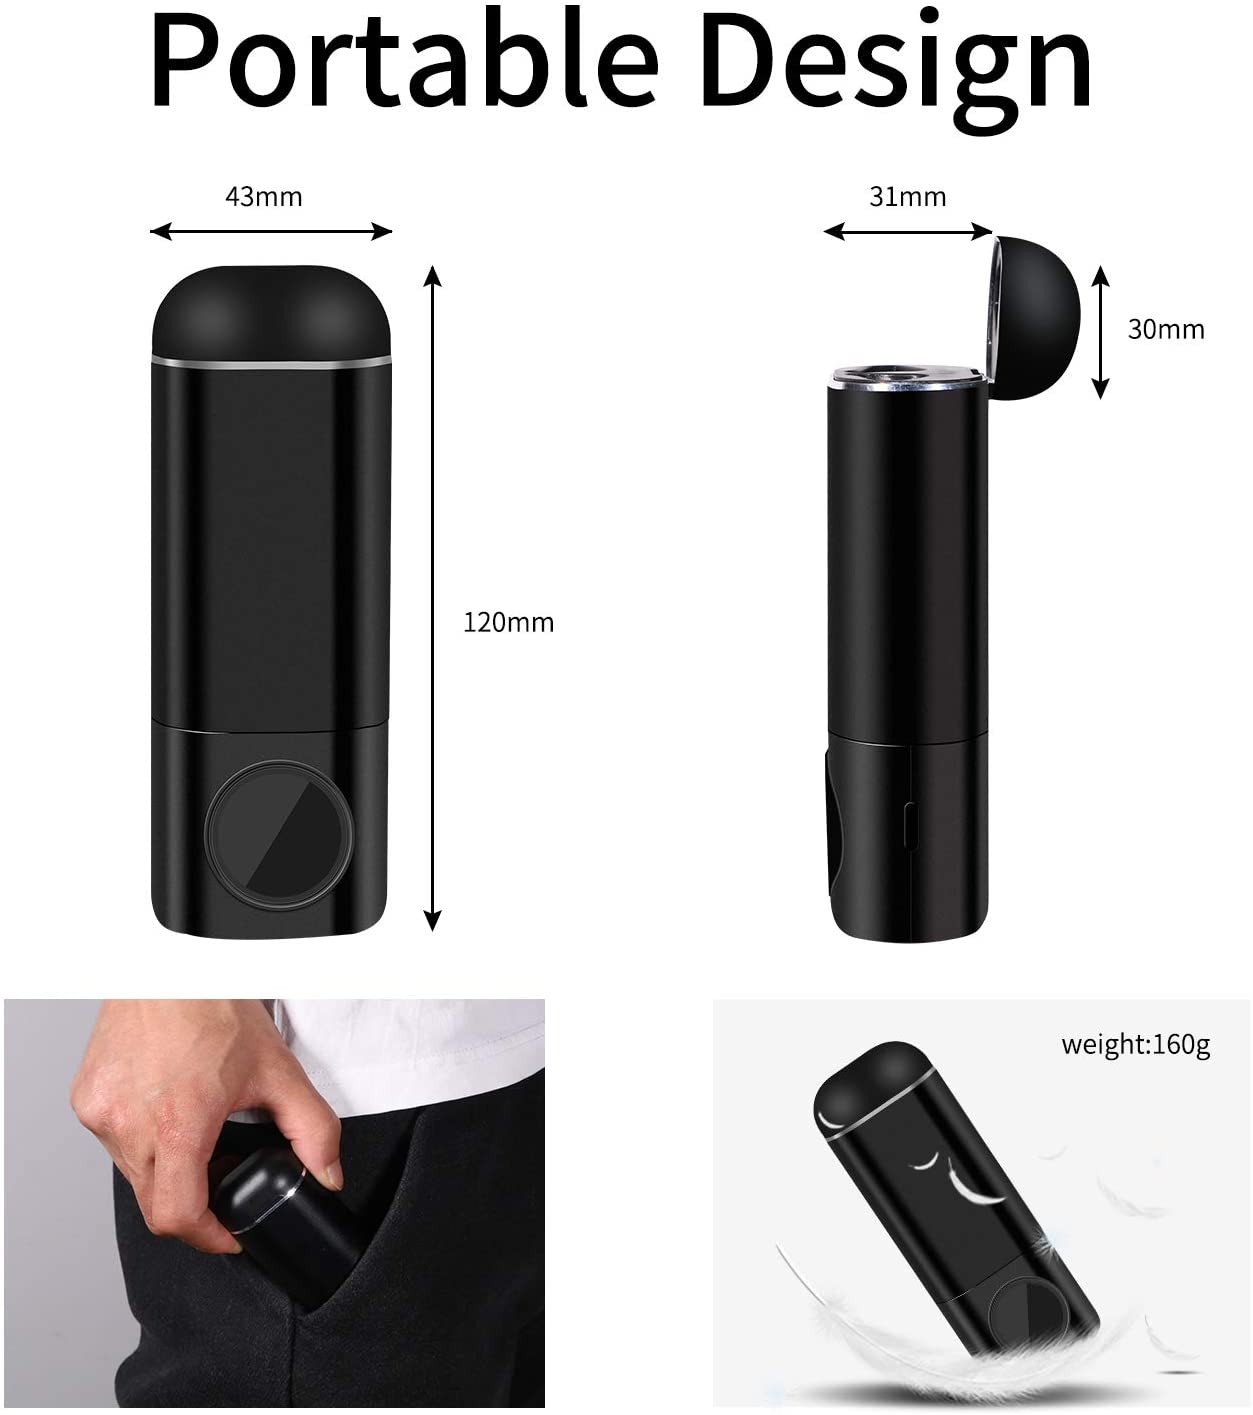 3-in-1 Power Bank